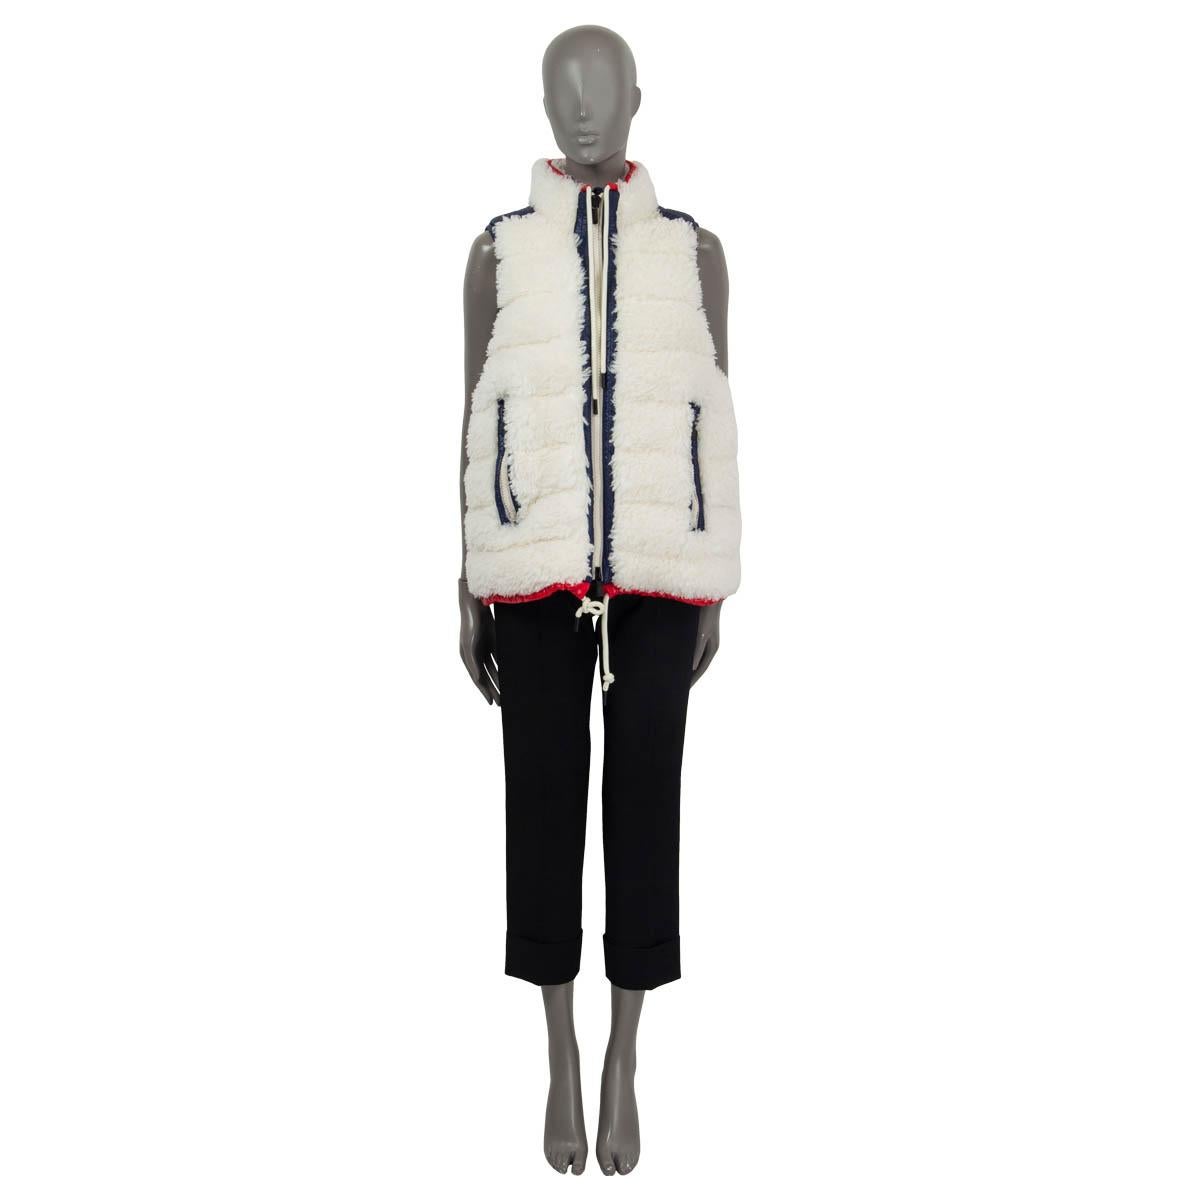 100% authentic Moncler Grenoble shearling padded down vest in white, blue and red polyester (100%). Featres two zip pockets on the front and drawstring closures at the neck and the hips. Opens with a zipper on the front. Lined in navy blue polyamide